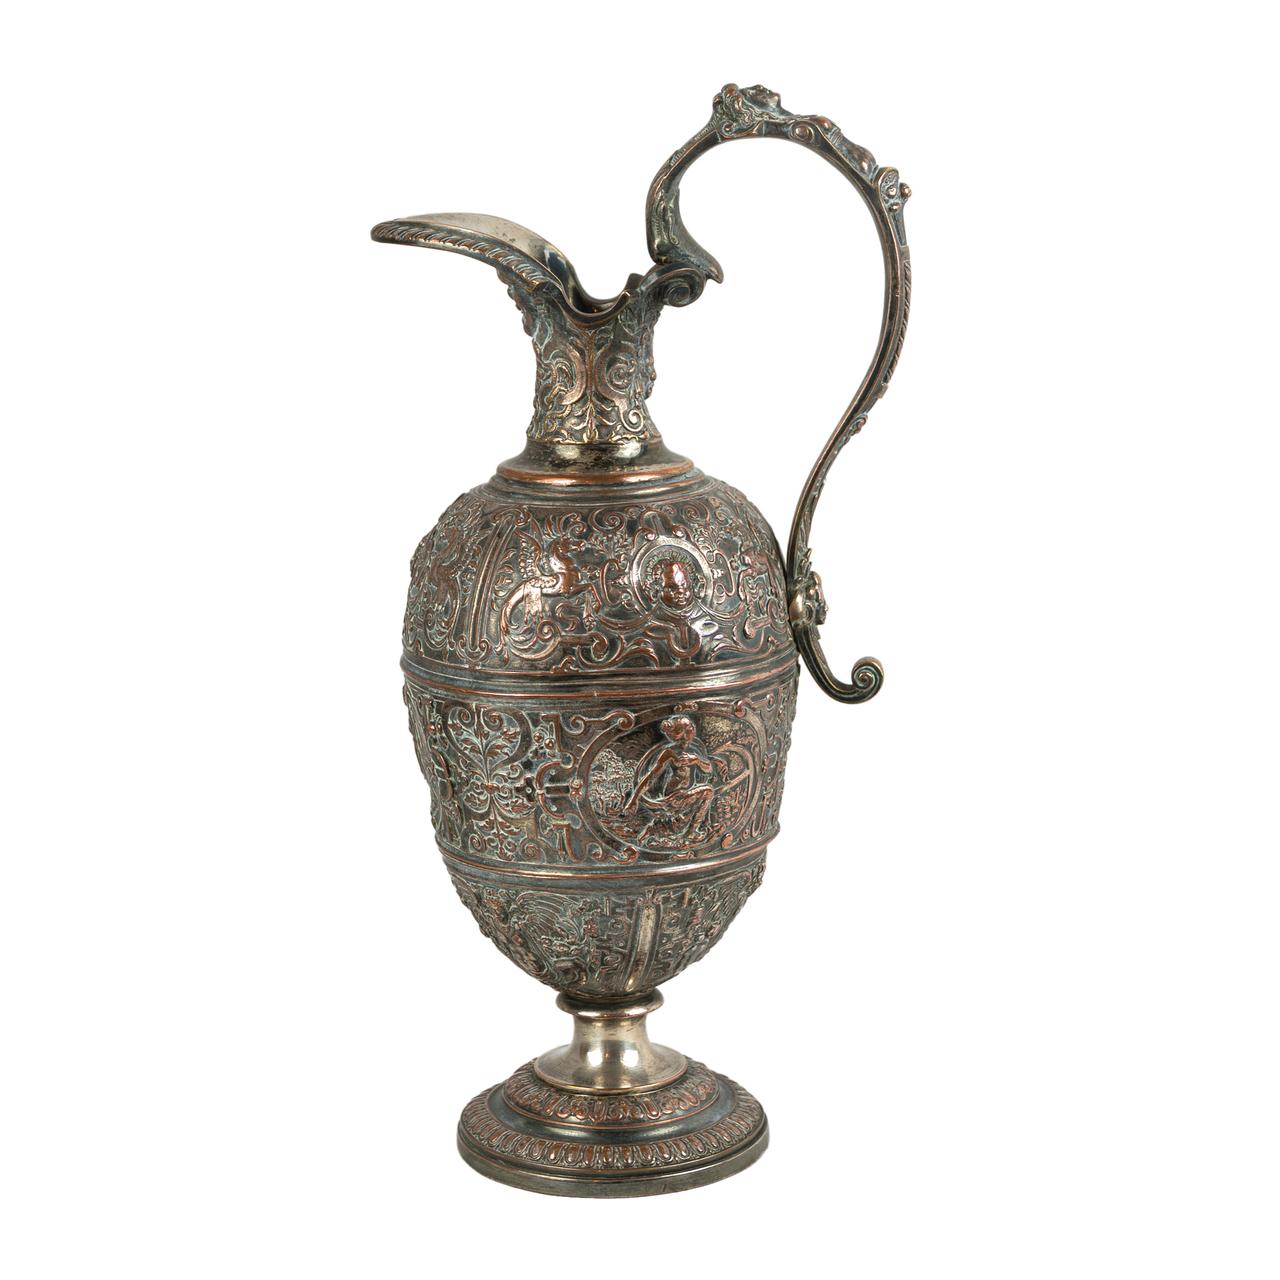 It features Renaissance Revival chased decoration all over, with strapwork, masks, arabesques, foliage and animals against a matte silver background. The body has three banded sections, each with its own motifs. The tall neck compliments the deeply